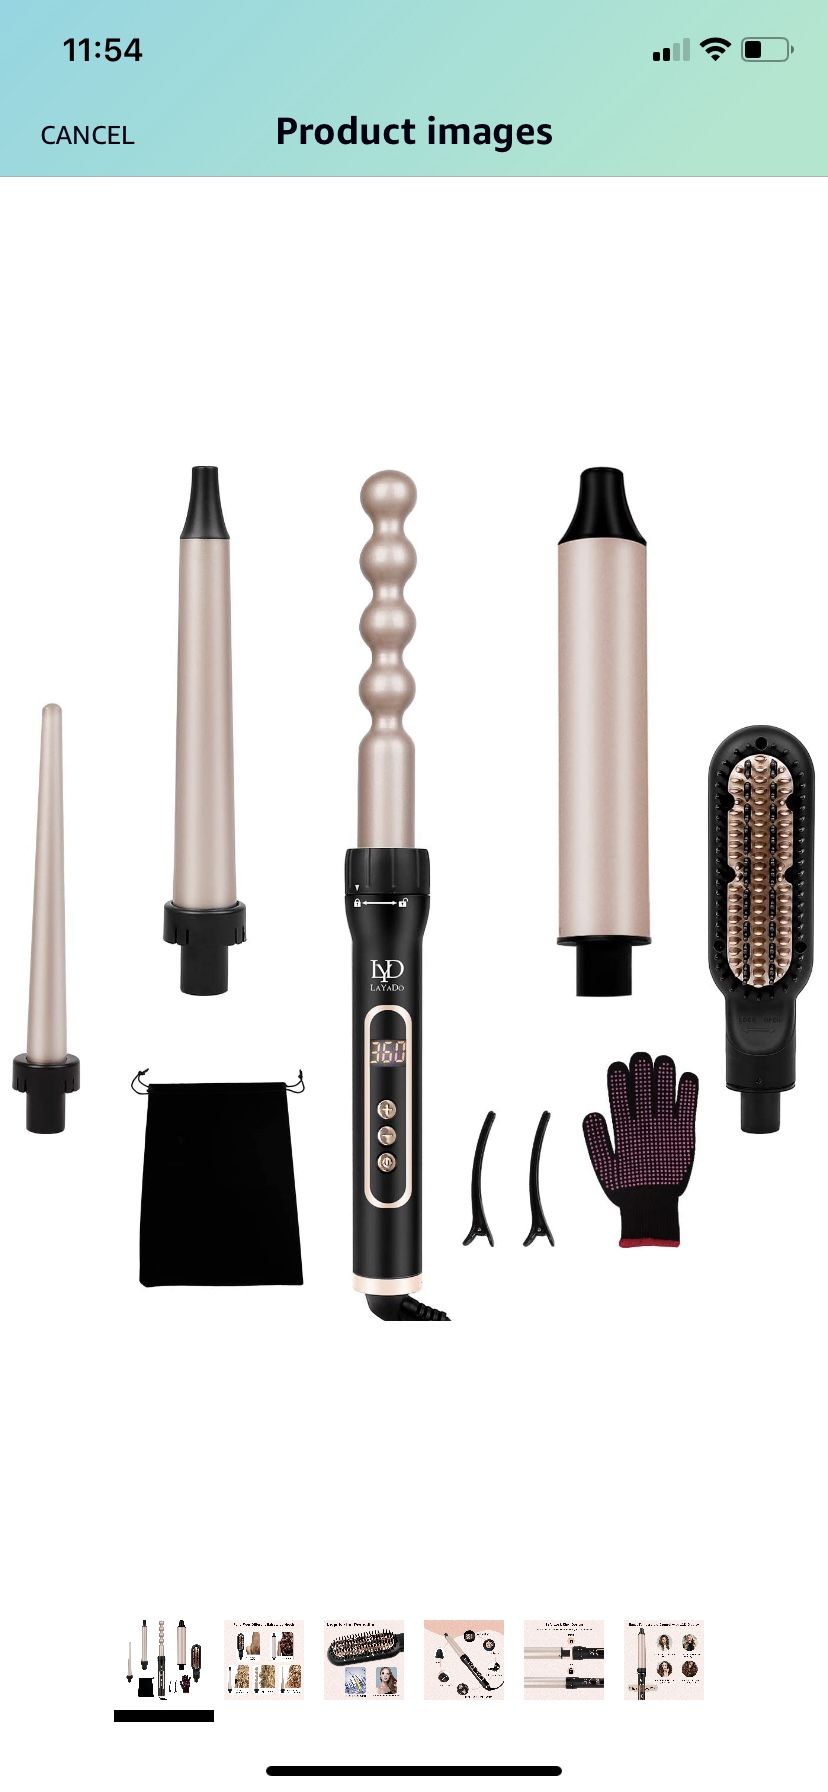 5 in 1 curling iron     //